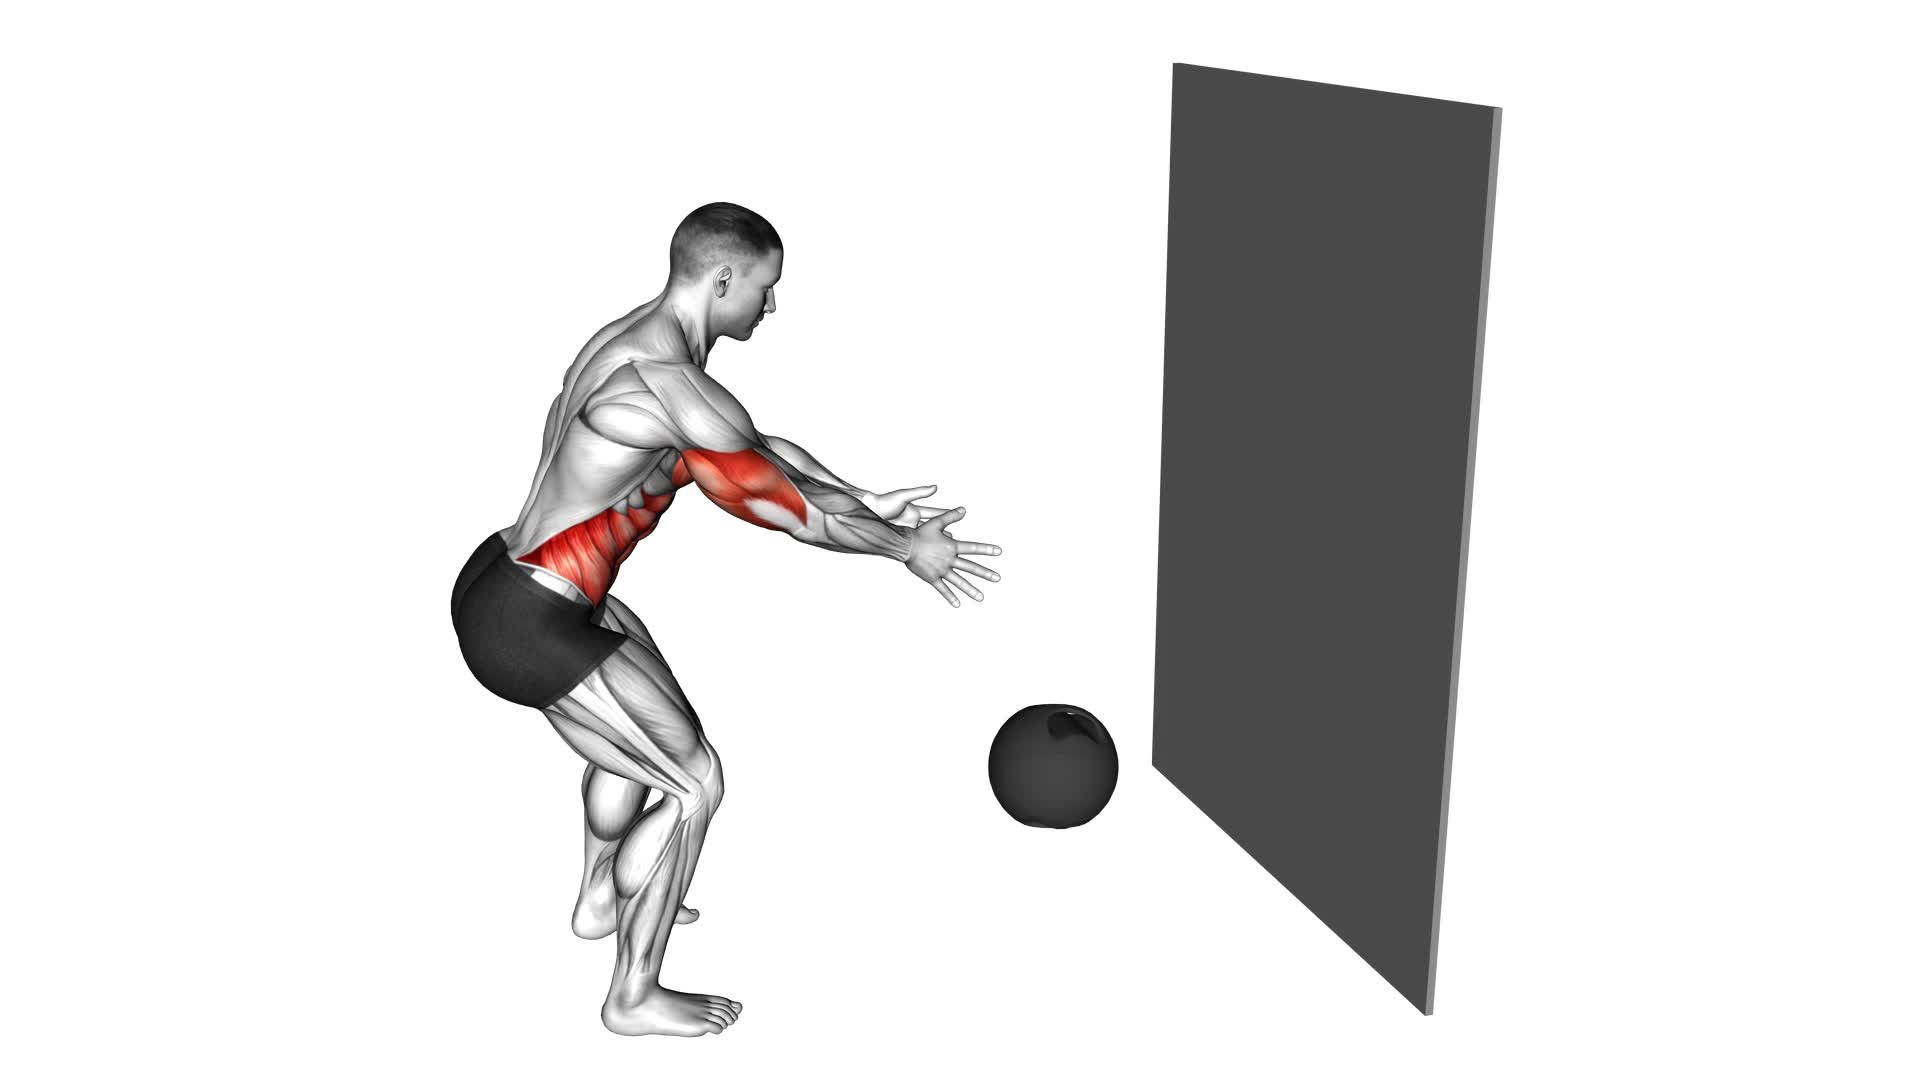 Medicine Ball Chest Pass Against Wall - Video Exercise Guide & Tips